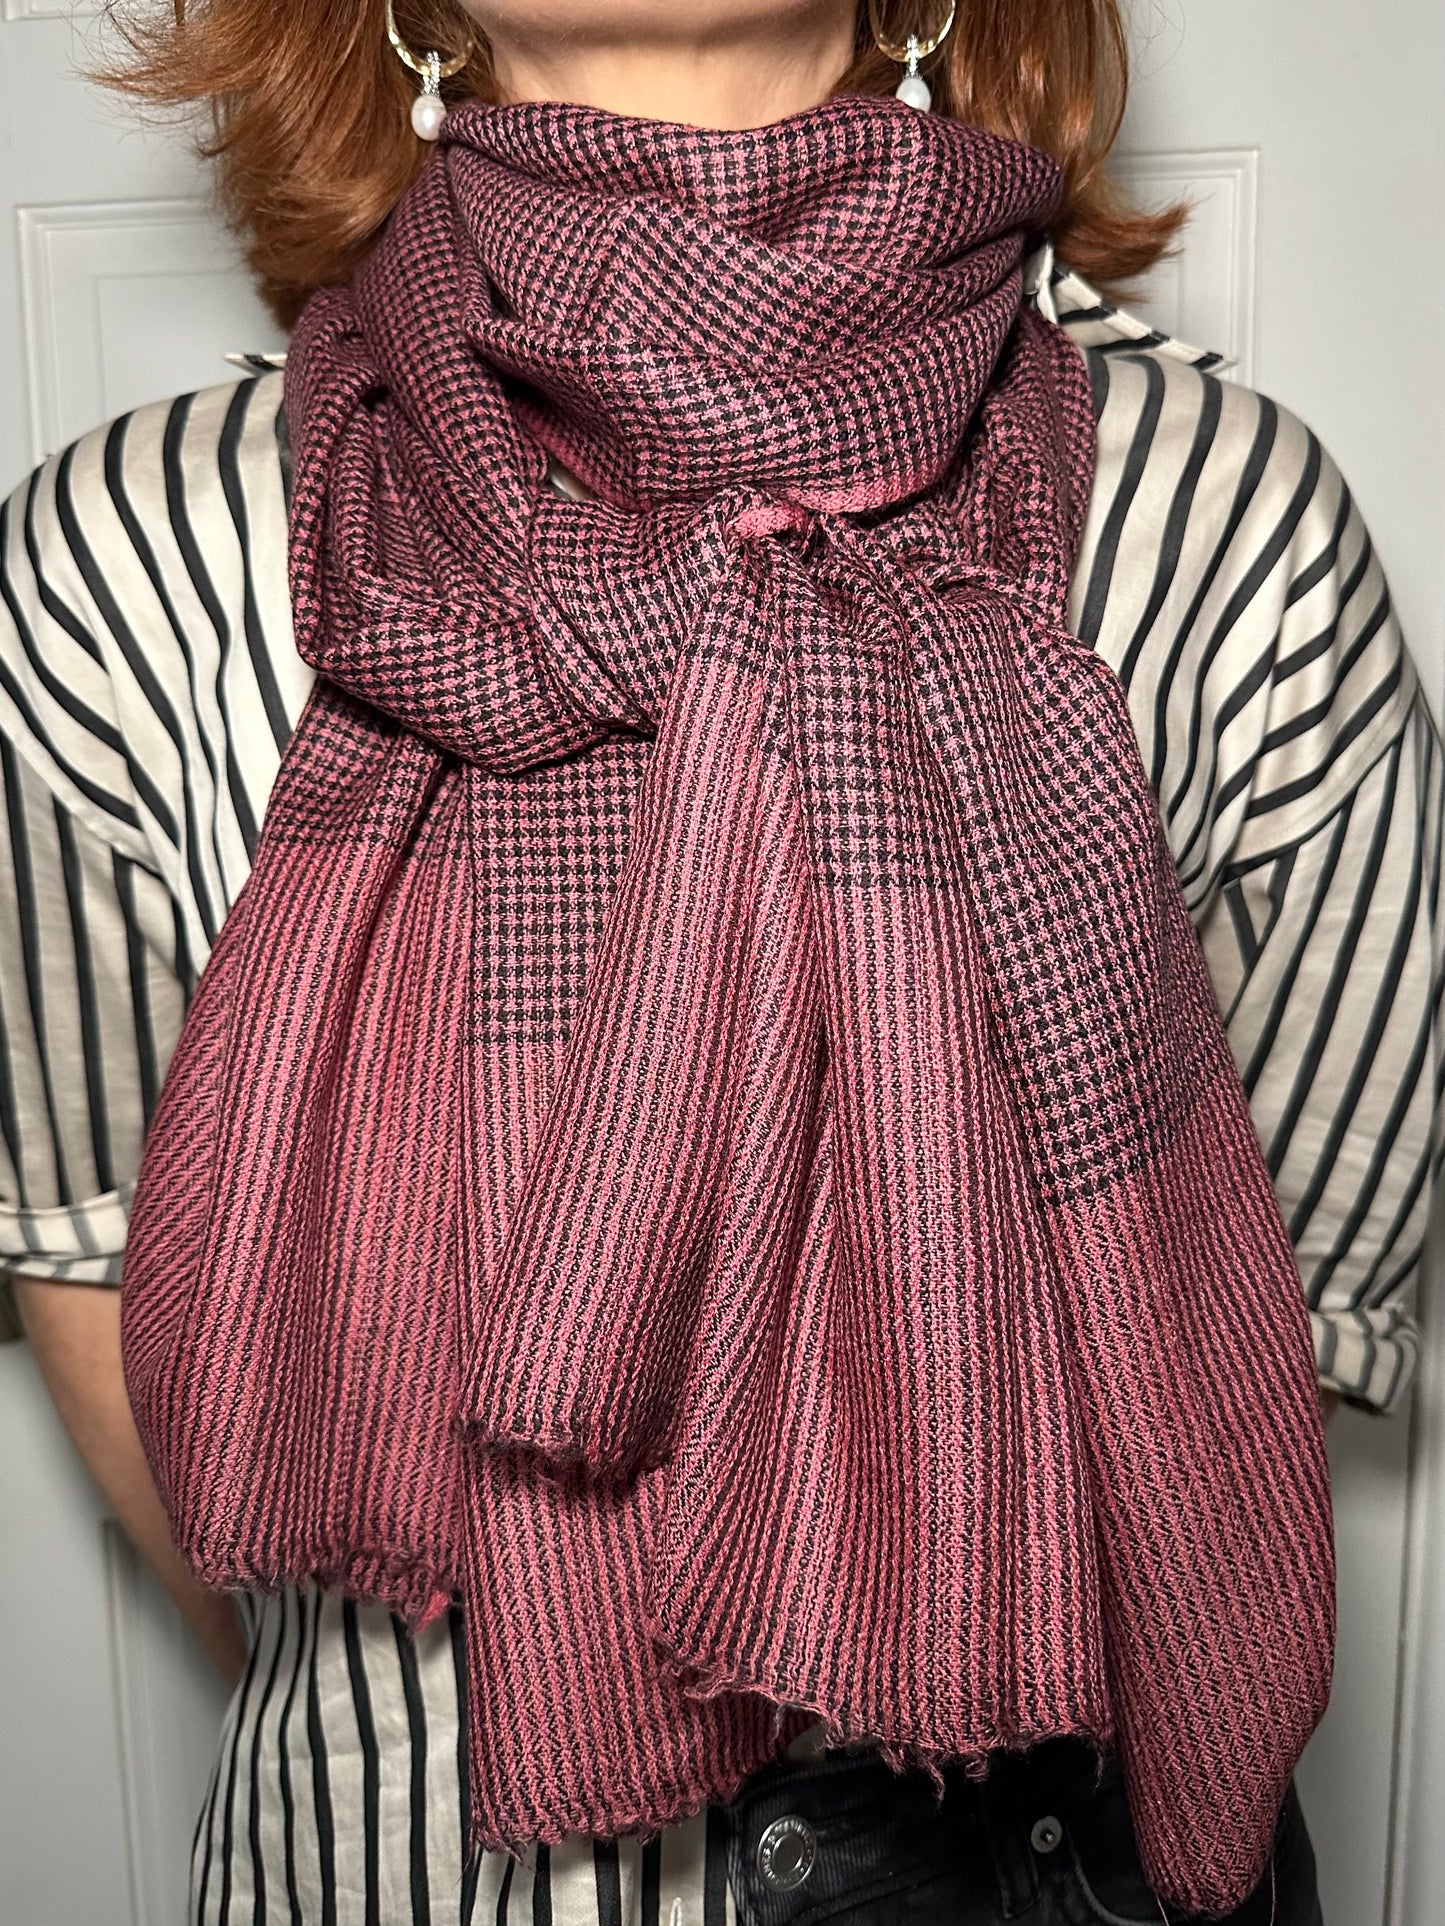 The Goldie Scarf - Deep Check